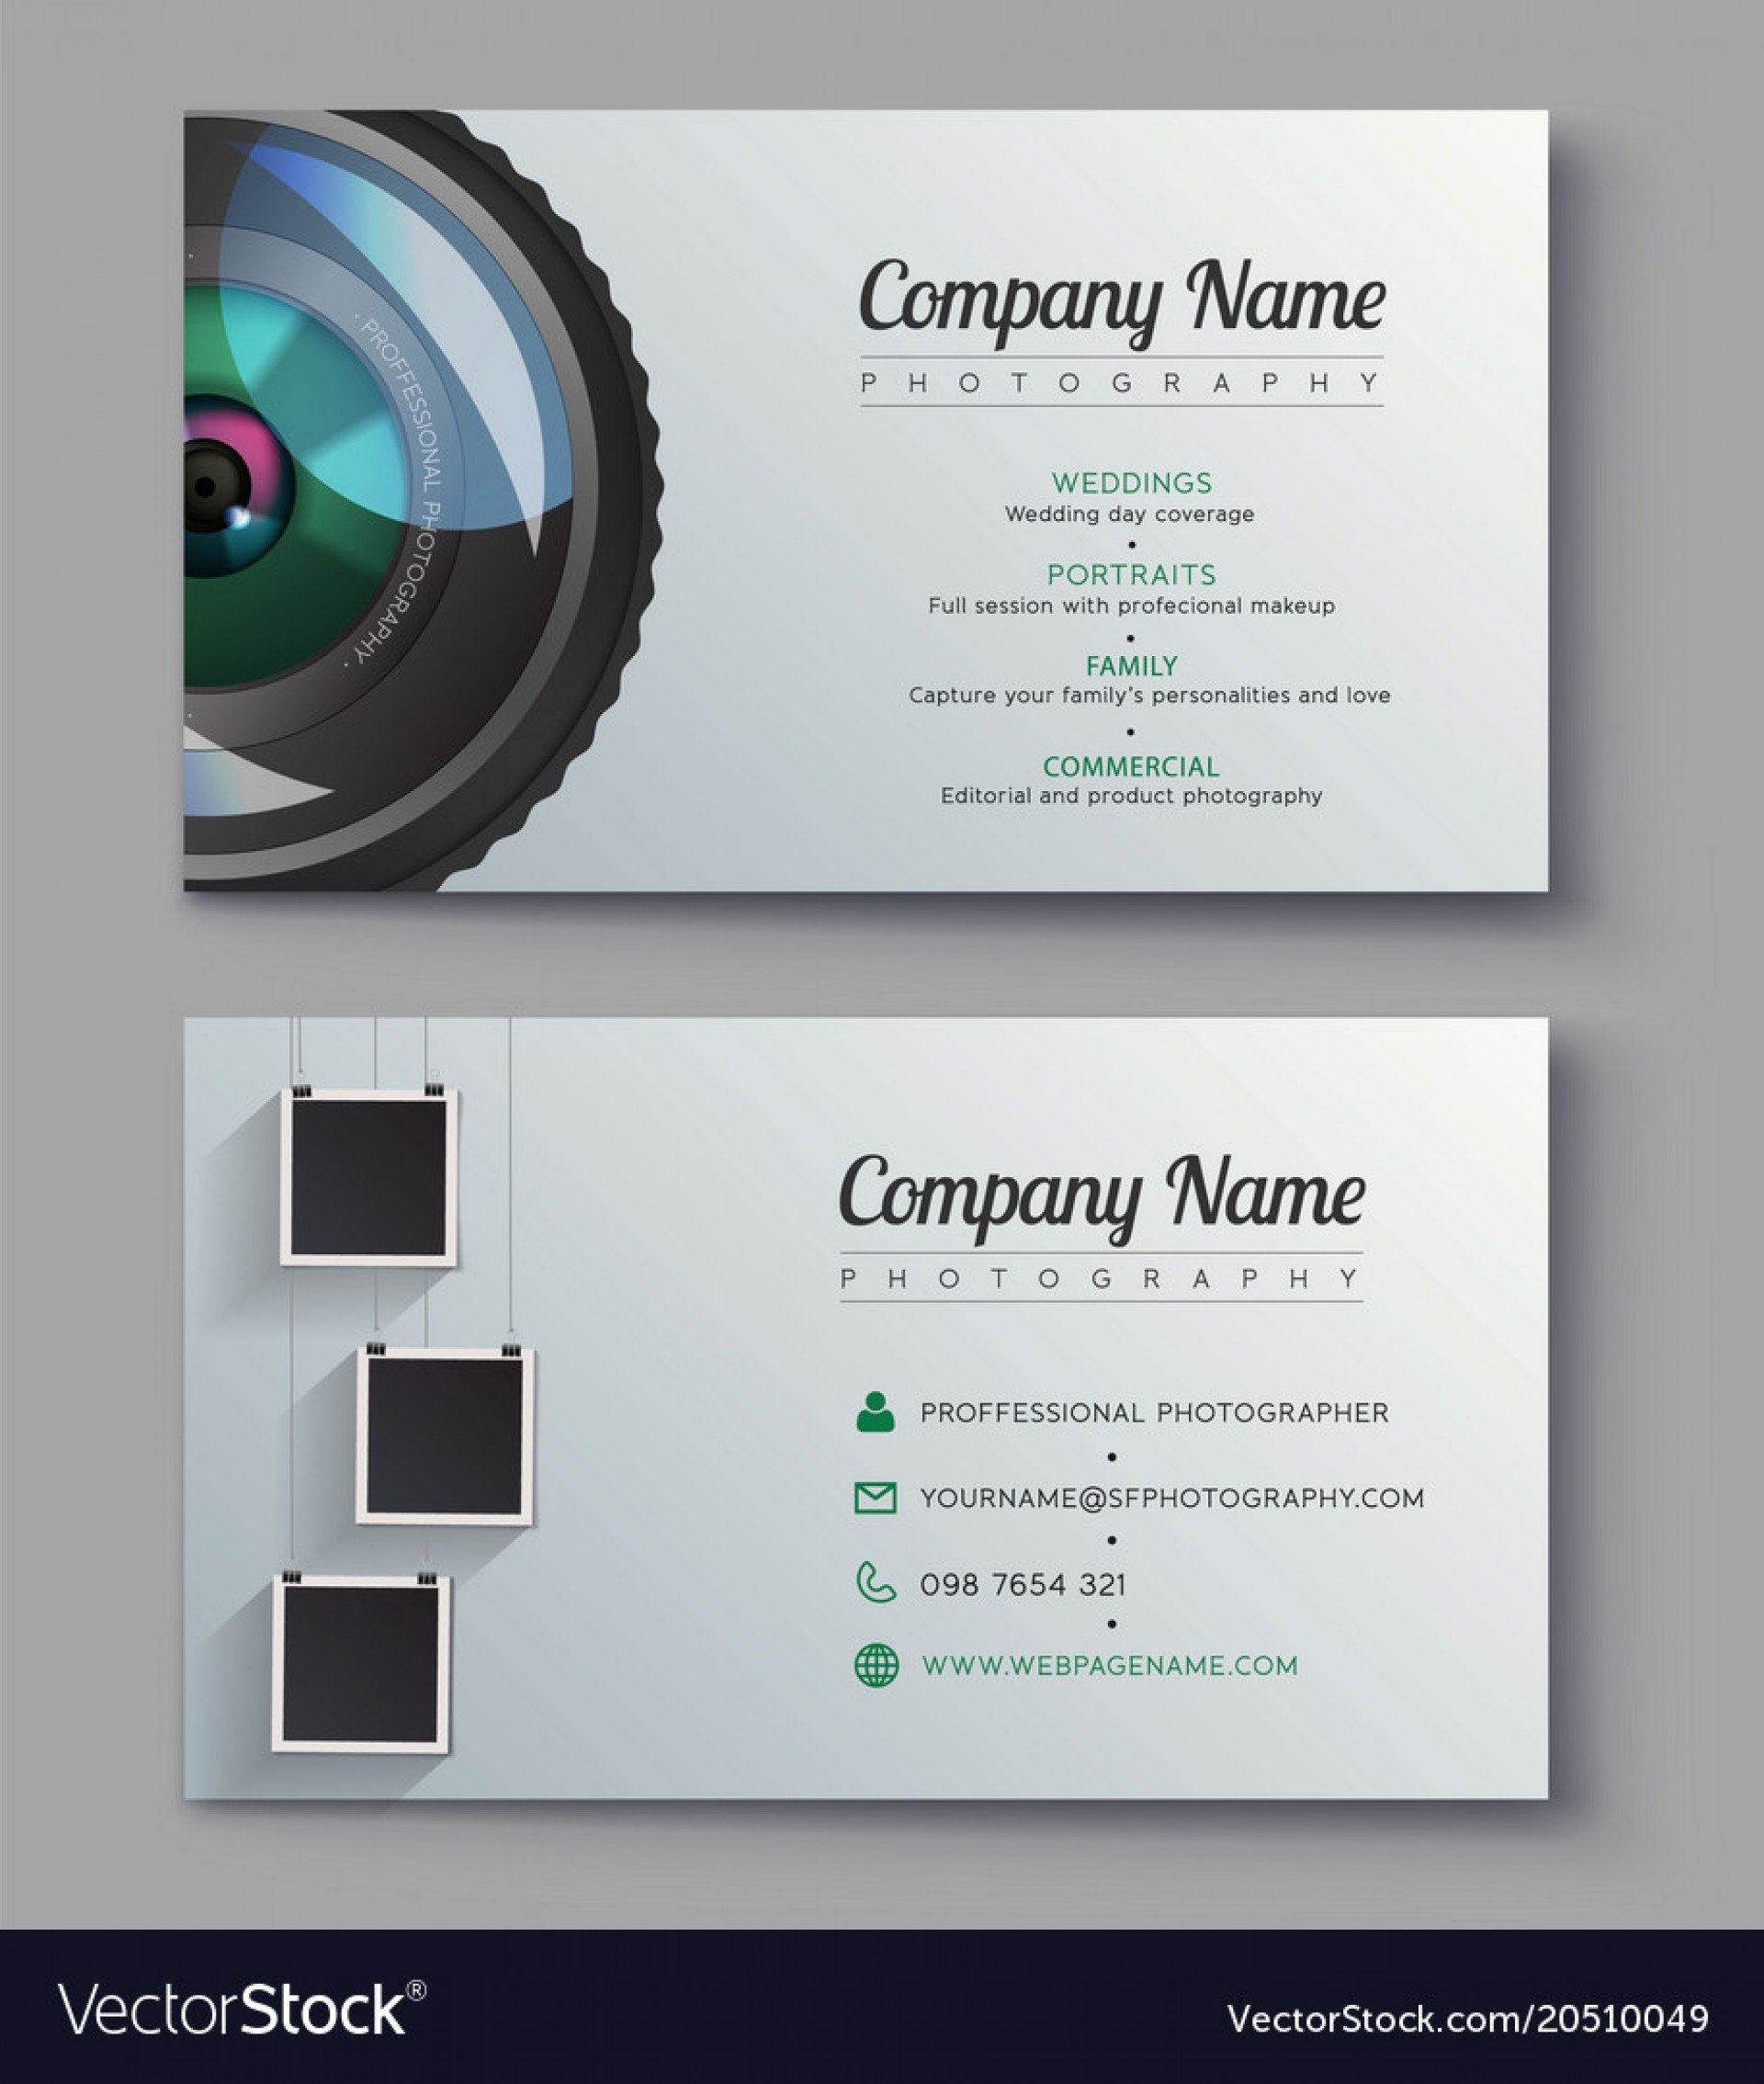 Photographer Business Card Template Design For Vector with Photography Business Card Template Photoshop